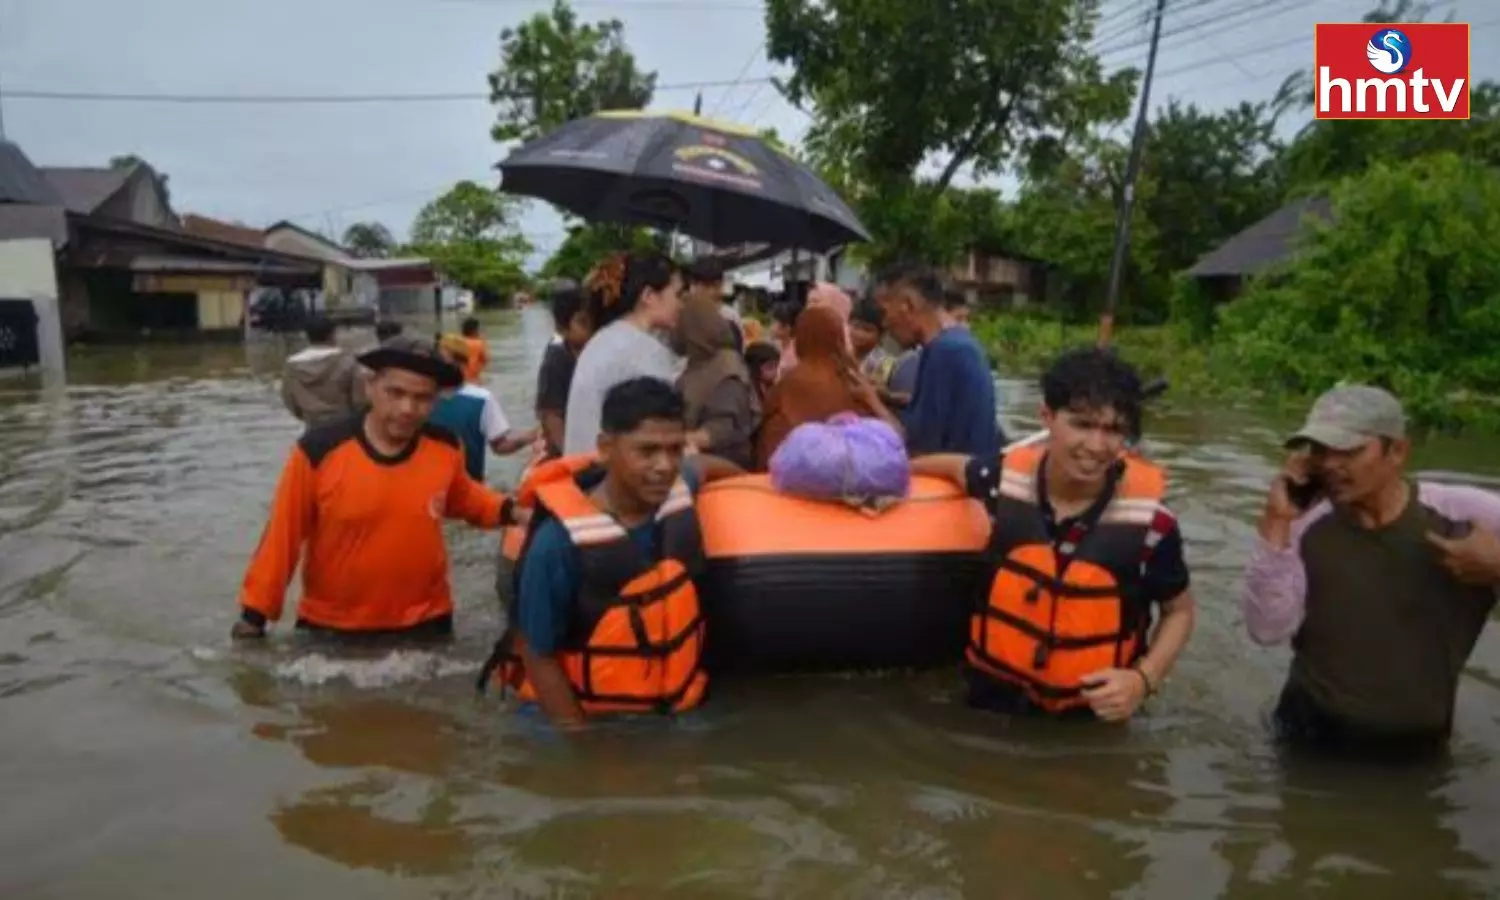 Indonesia Floods Sudden Torrential Rains Cause Floods And Landslides In Indonesia Many People Died Missing